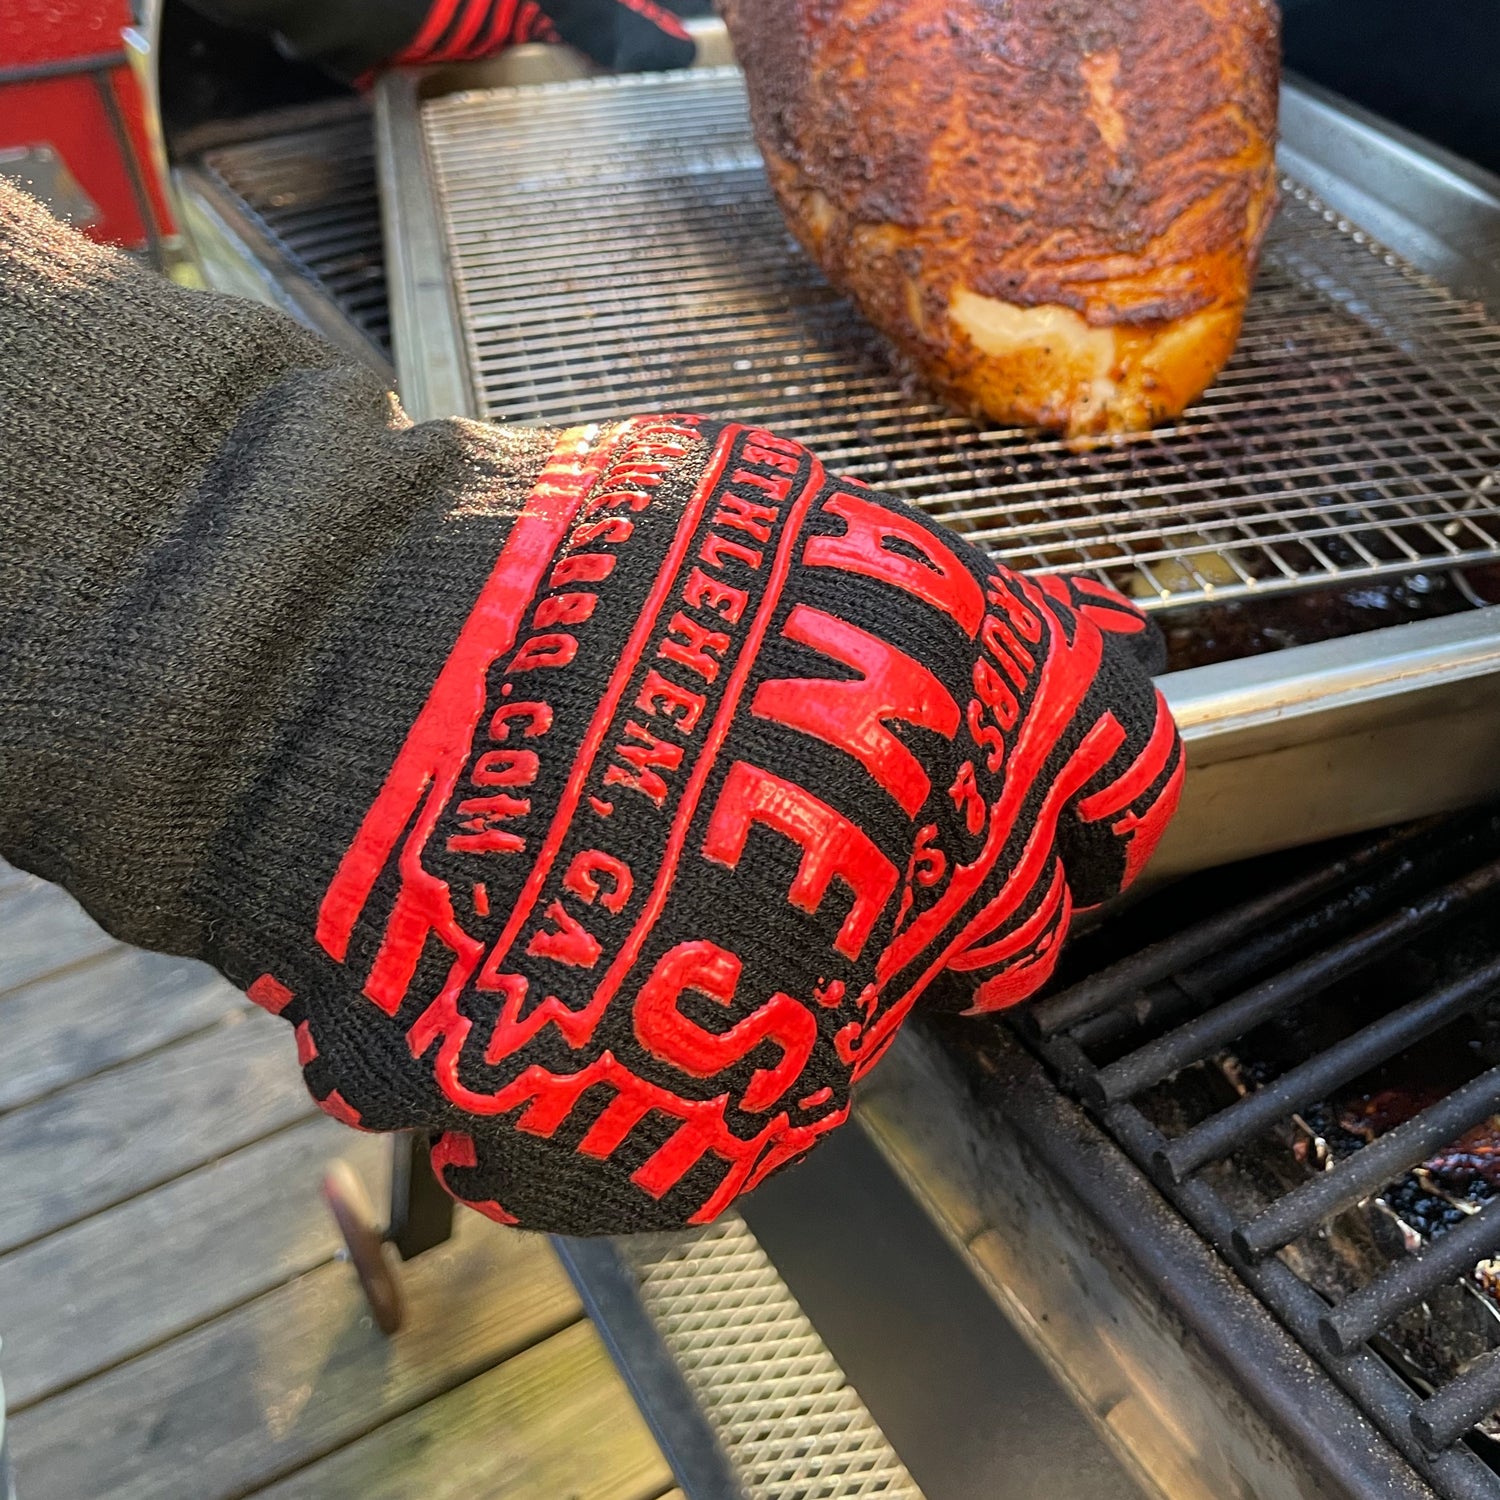 Long Silicone Oven Mitts with Non-Slip Grip, 13.2'' Heat Resistant